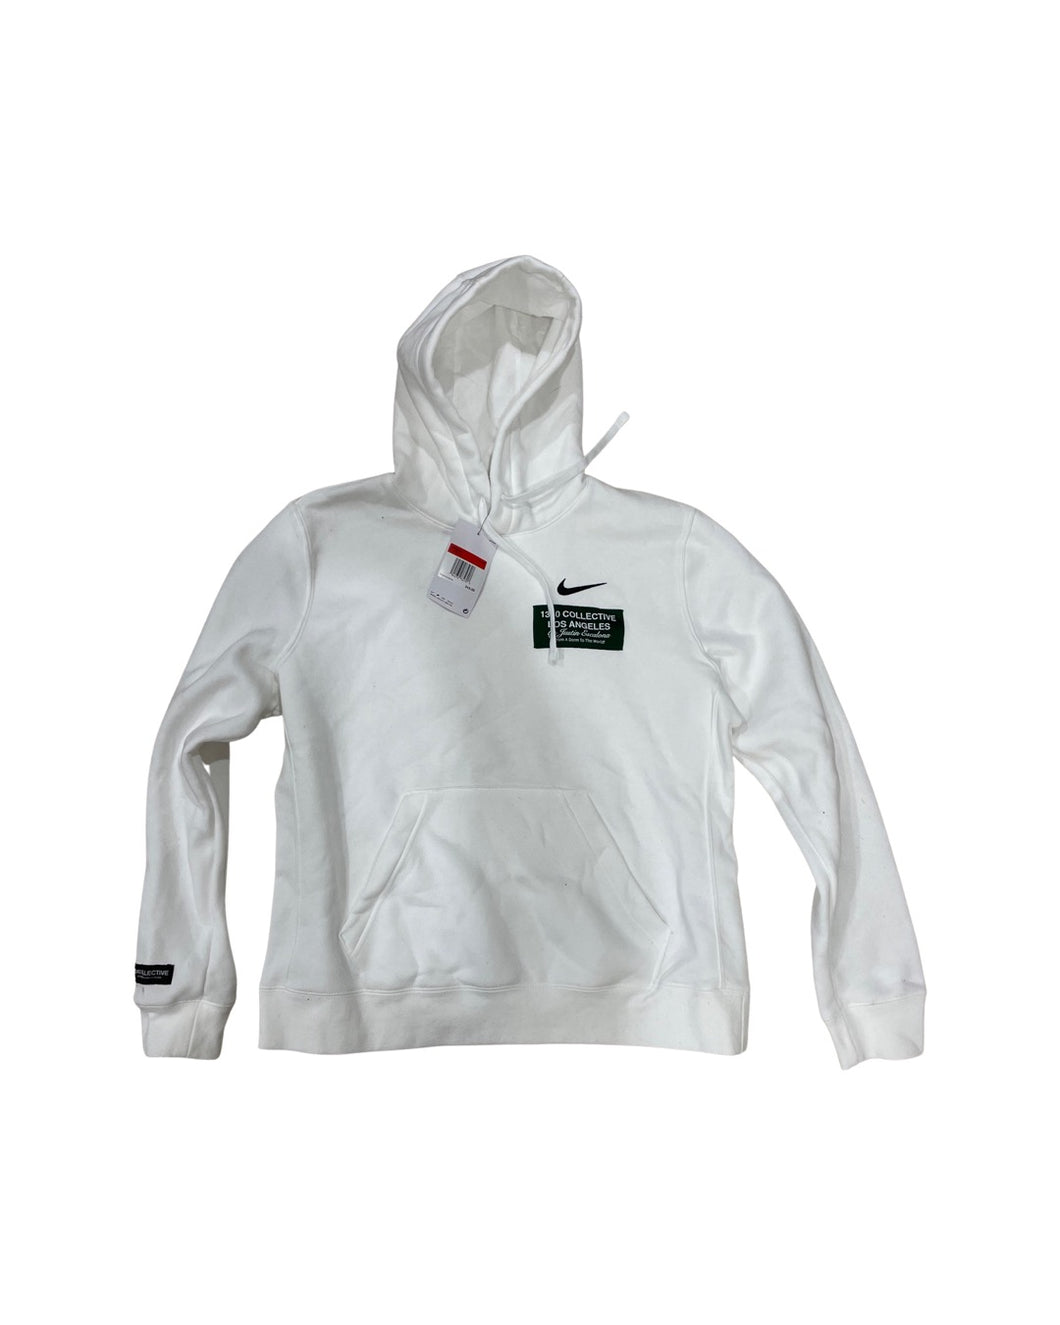 1340 PATCH - WHITE NIKE HOODIE (black friday 2022)